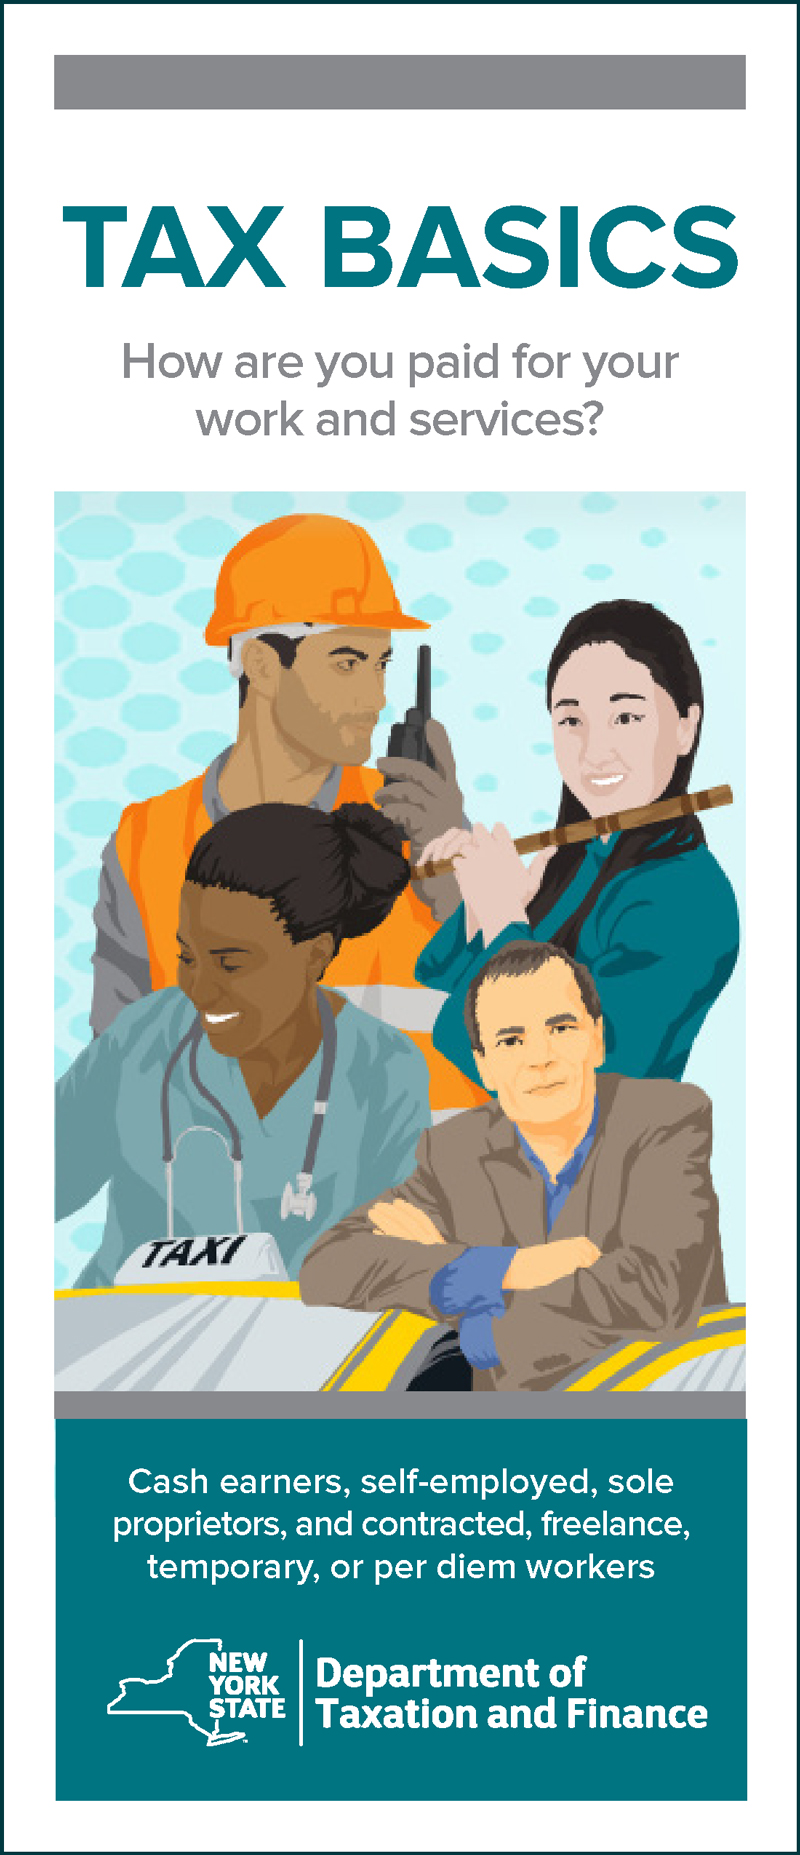 Construction worker, musician, nurse, and taxi driver